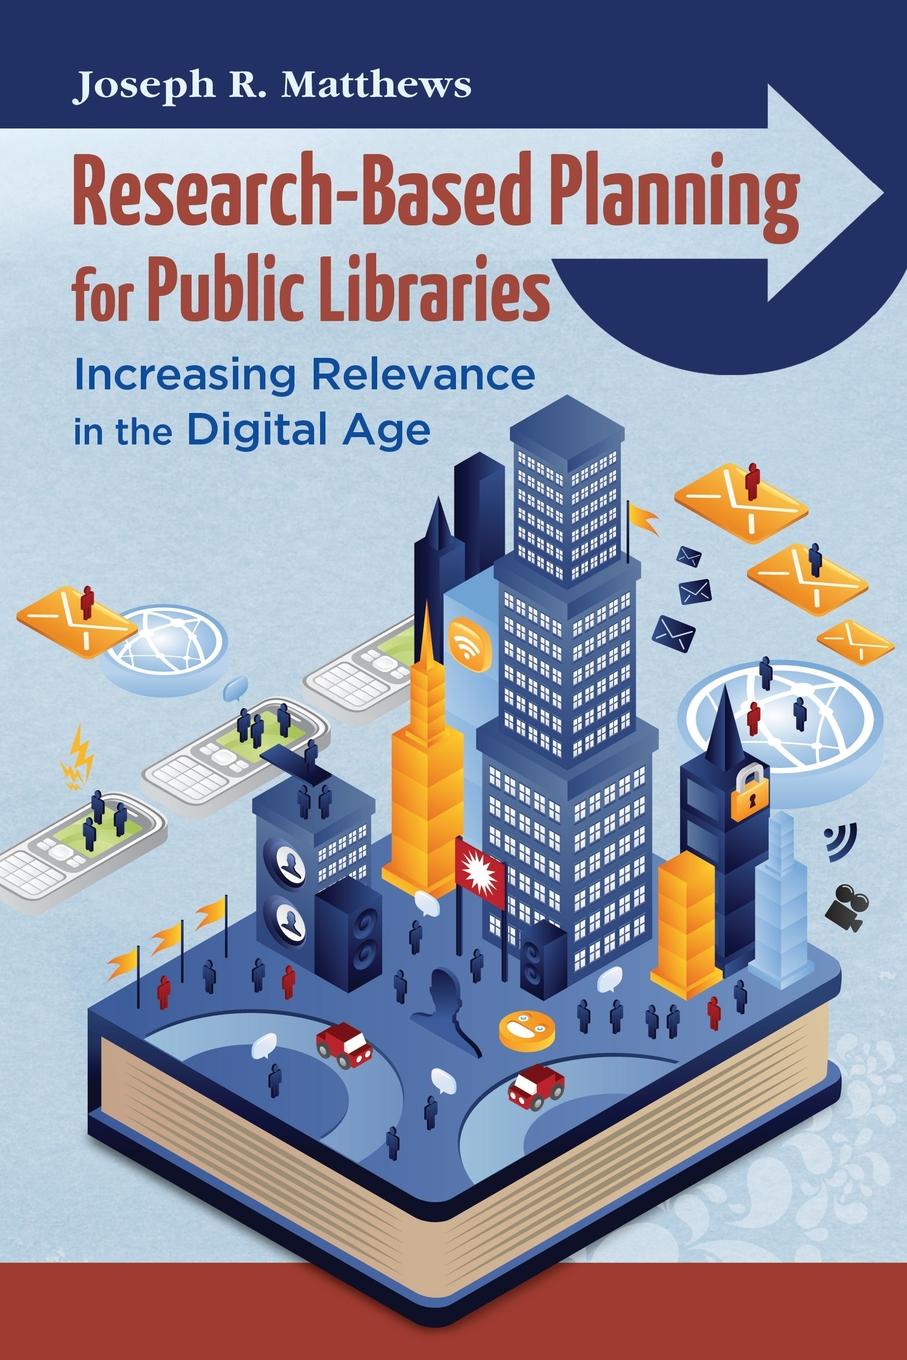 Research-Based Planning for Public Libraries. Increasing Relevance in the Digital Age